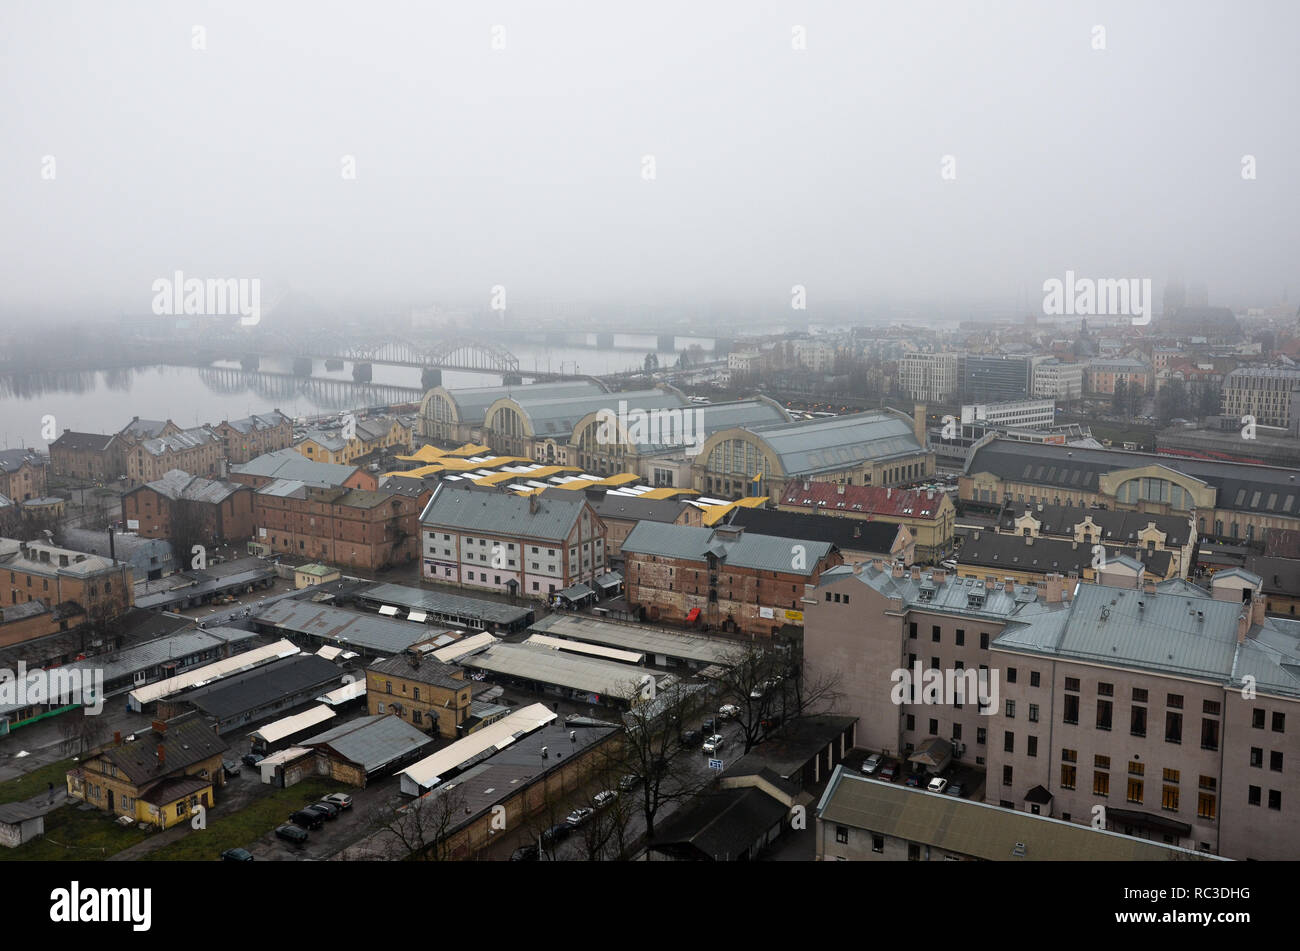 View of Riga Central Market and the Daugava River from the observation deck of Latvian Academy of Sciences, Riga, Republic of Latvia, December 2018 Stock Photo